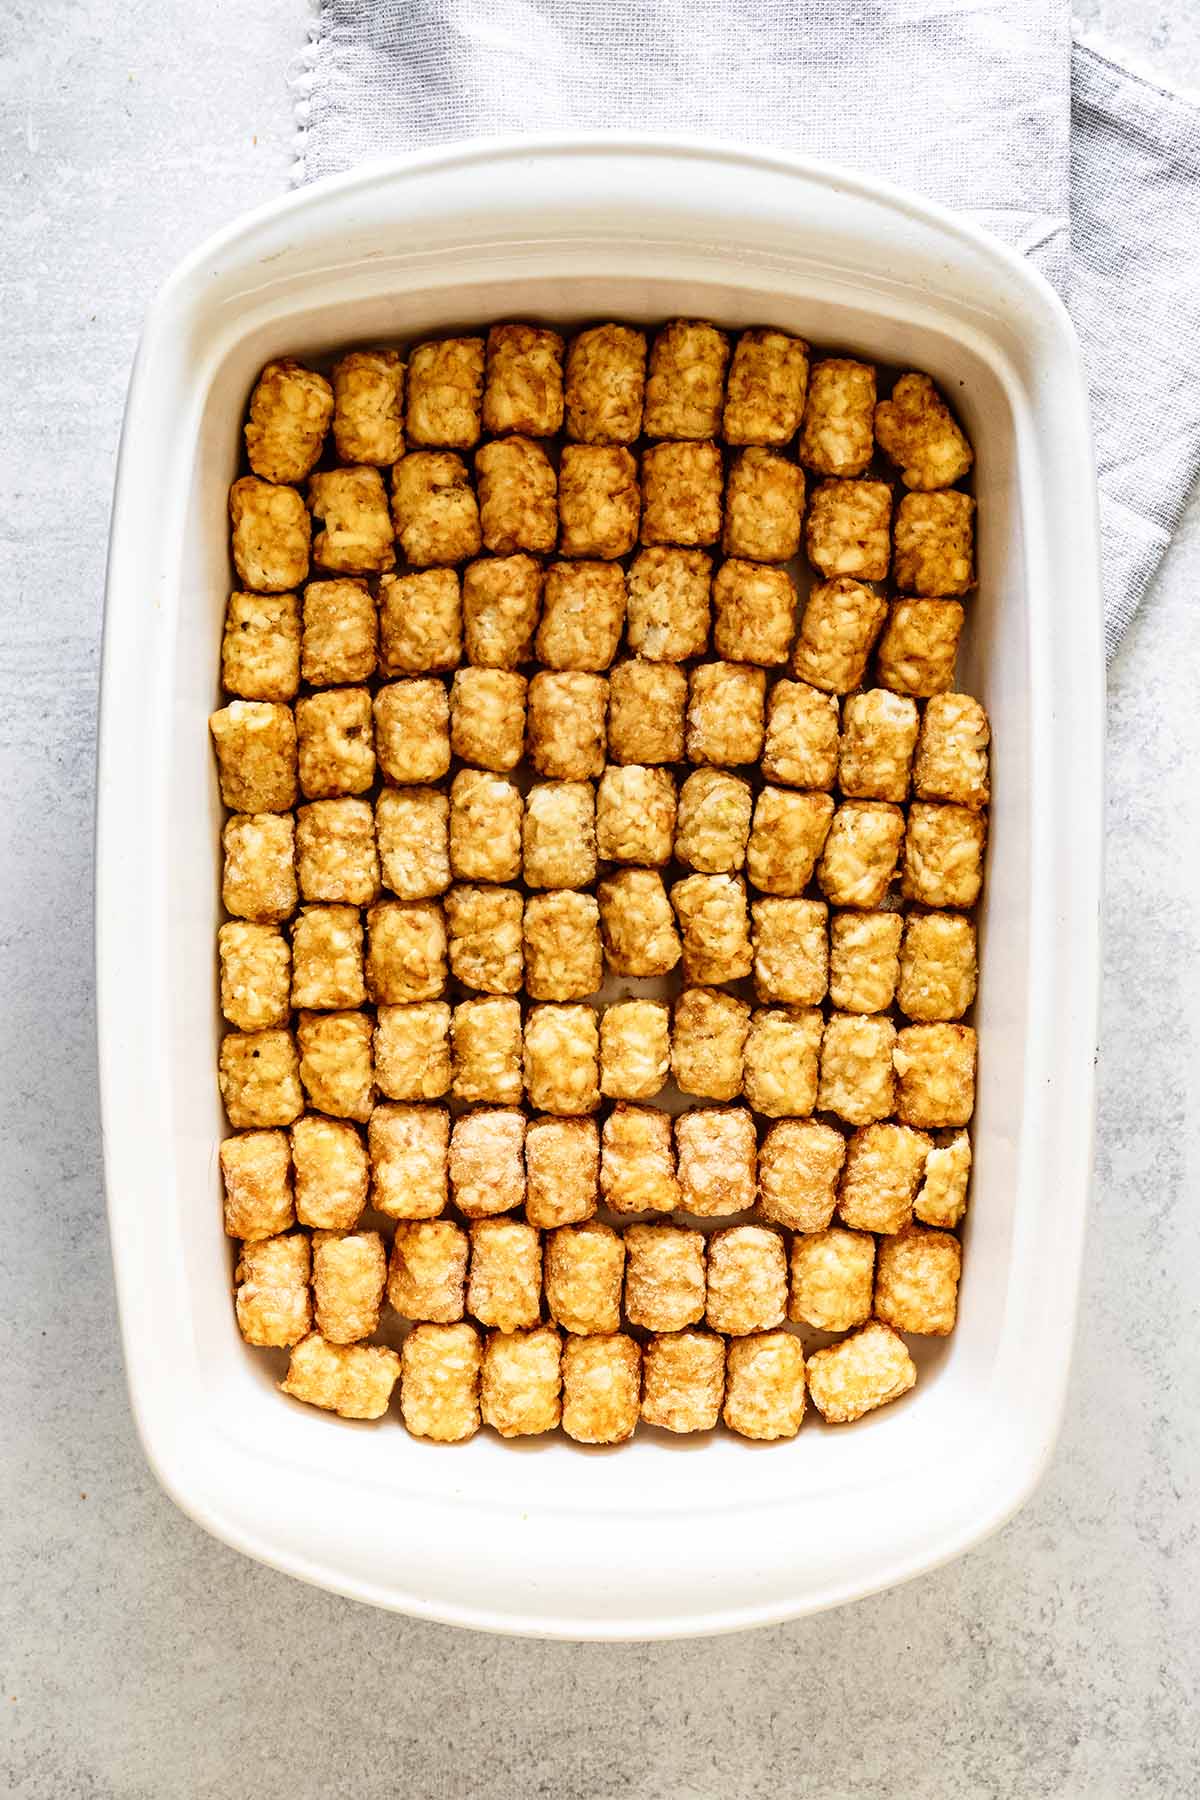 Frozen tater tots lined up in the bottom of a white ceramic baking dish.